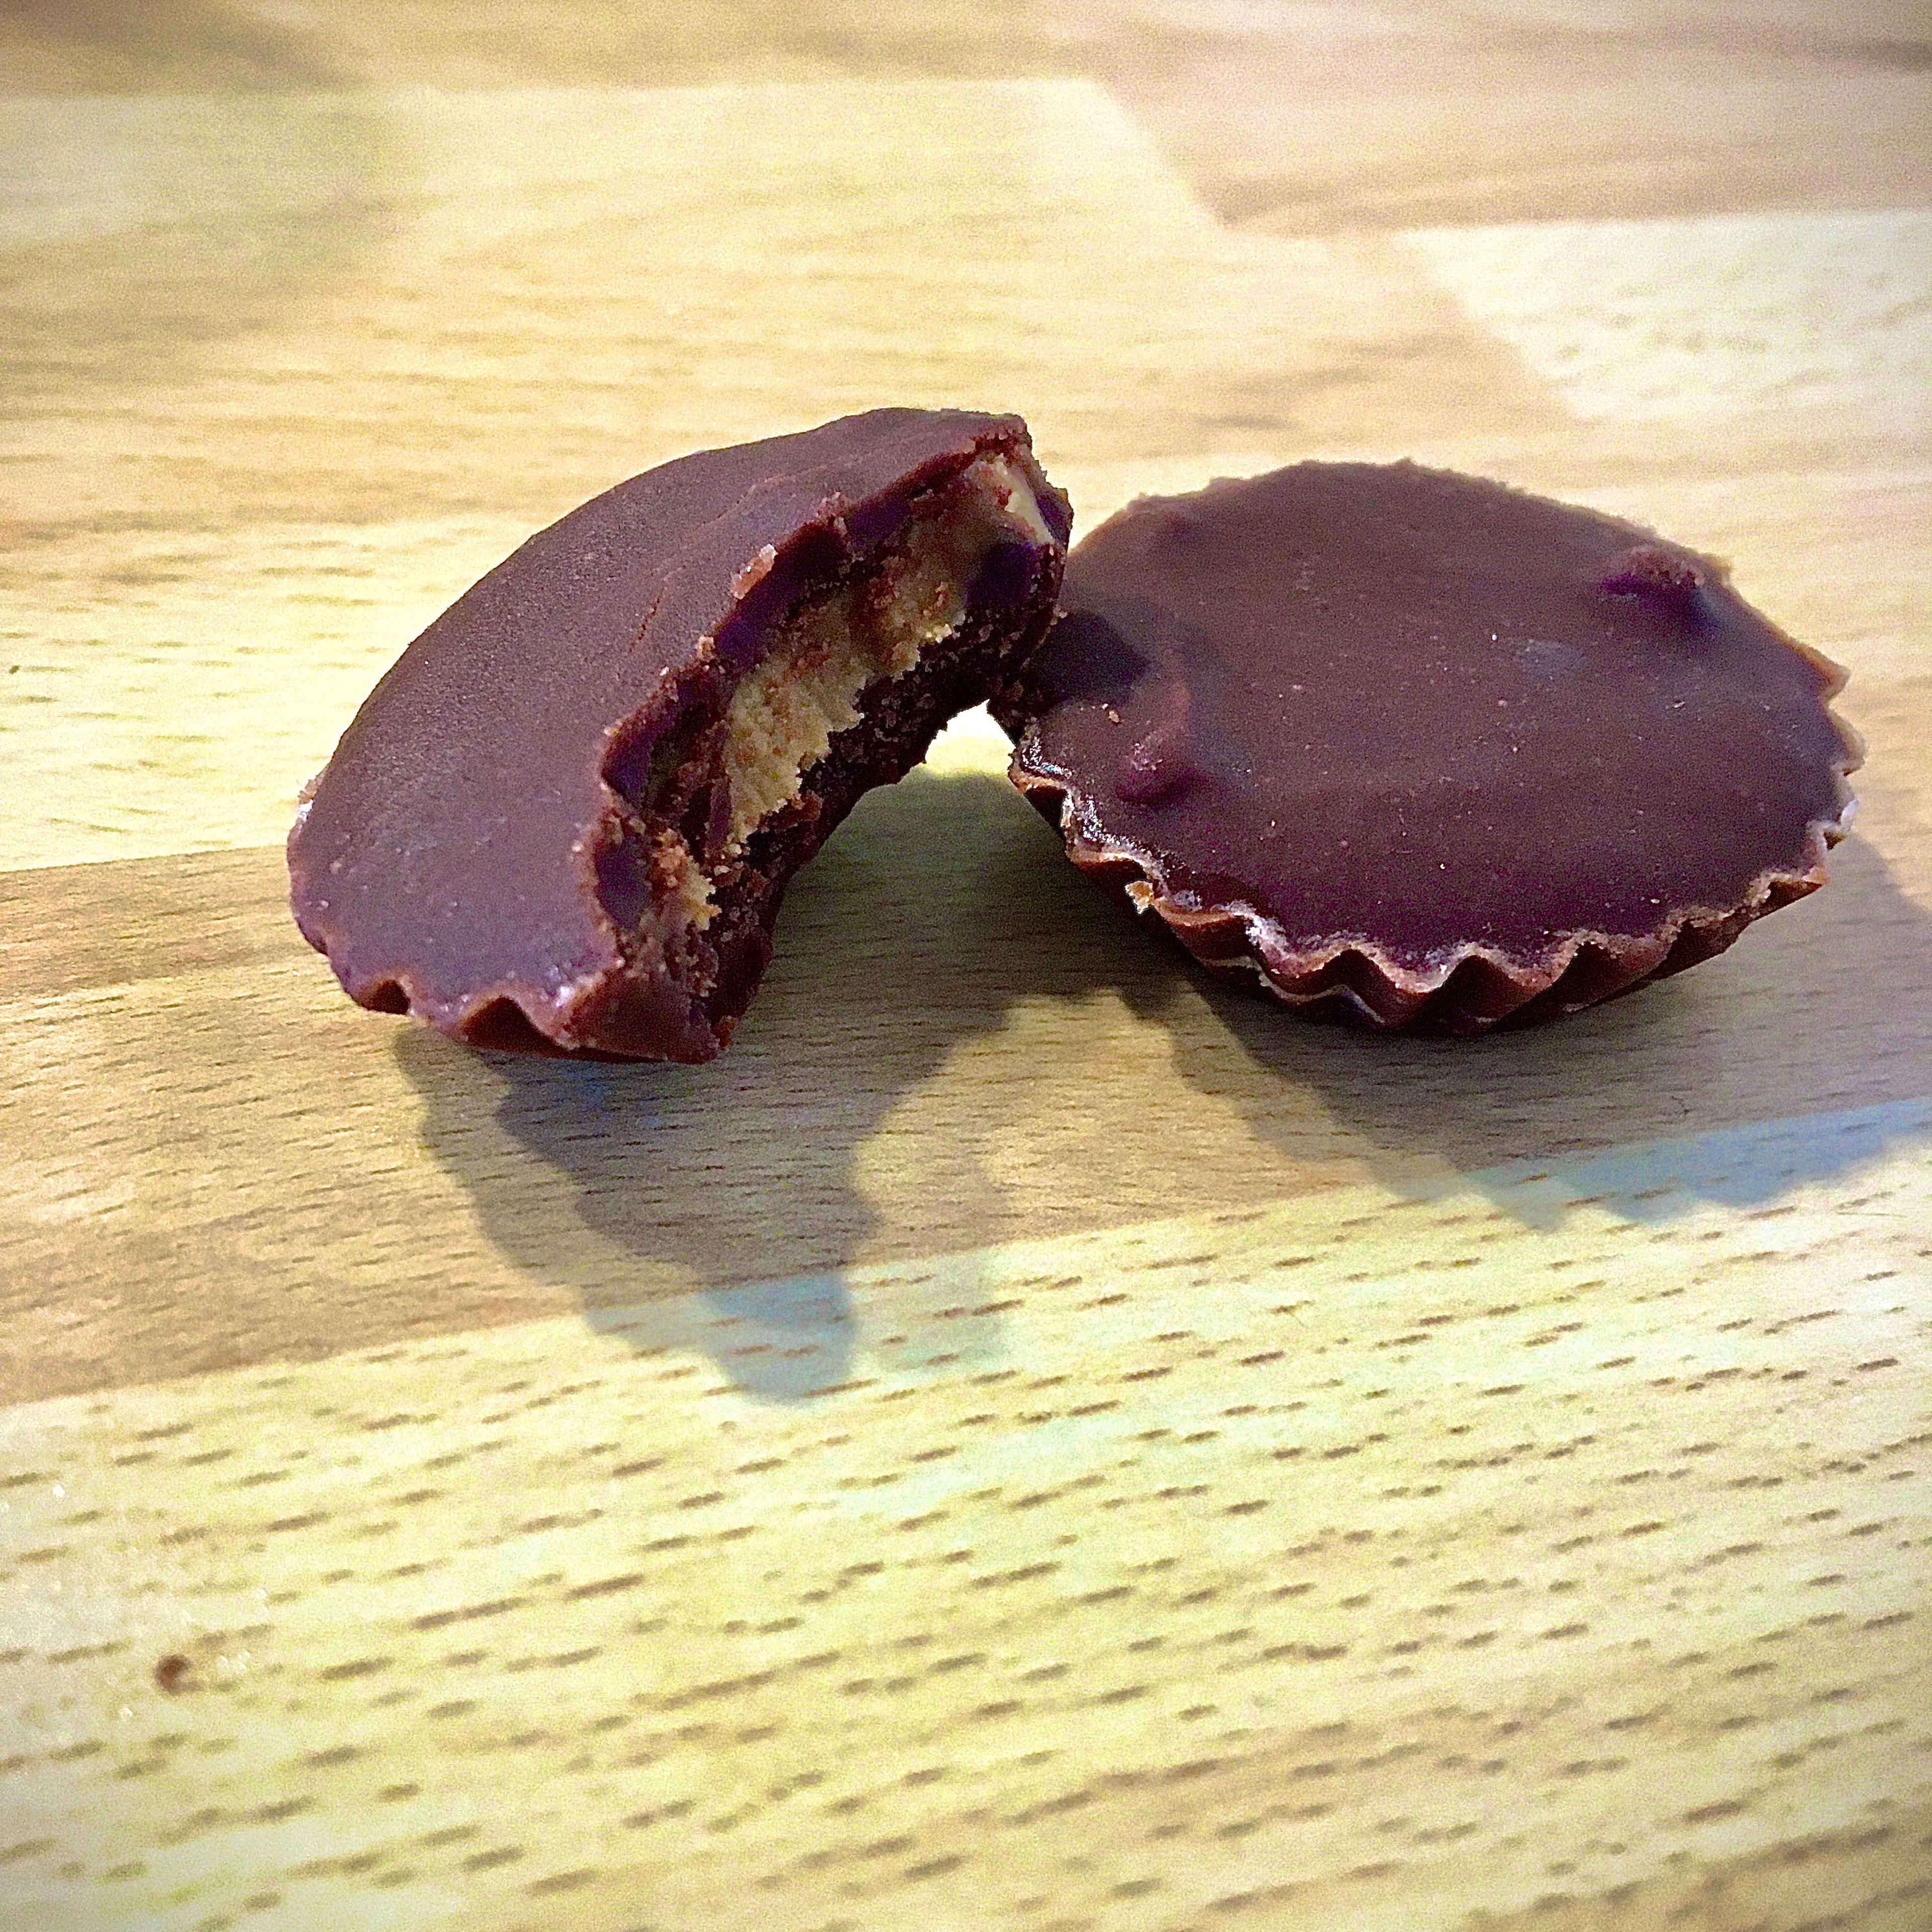 Homemade Reese’s (peanut butter chocolate cups)